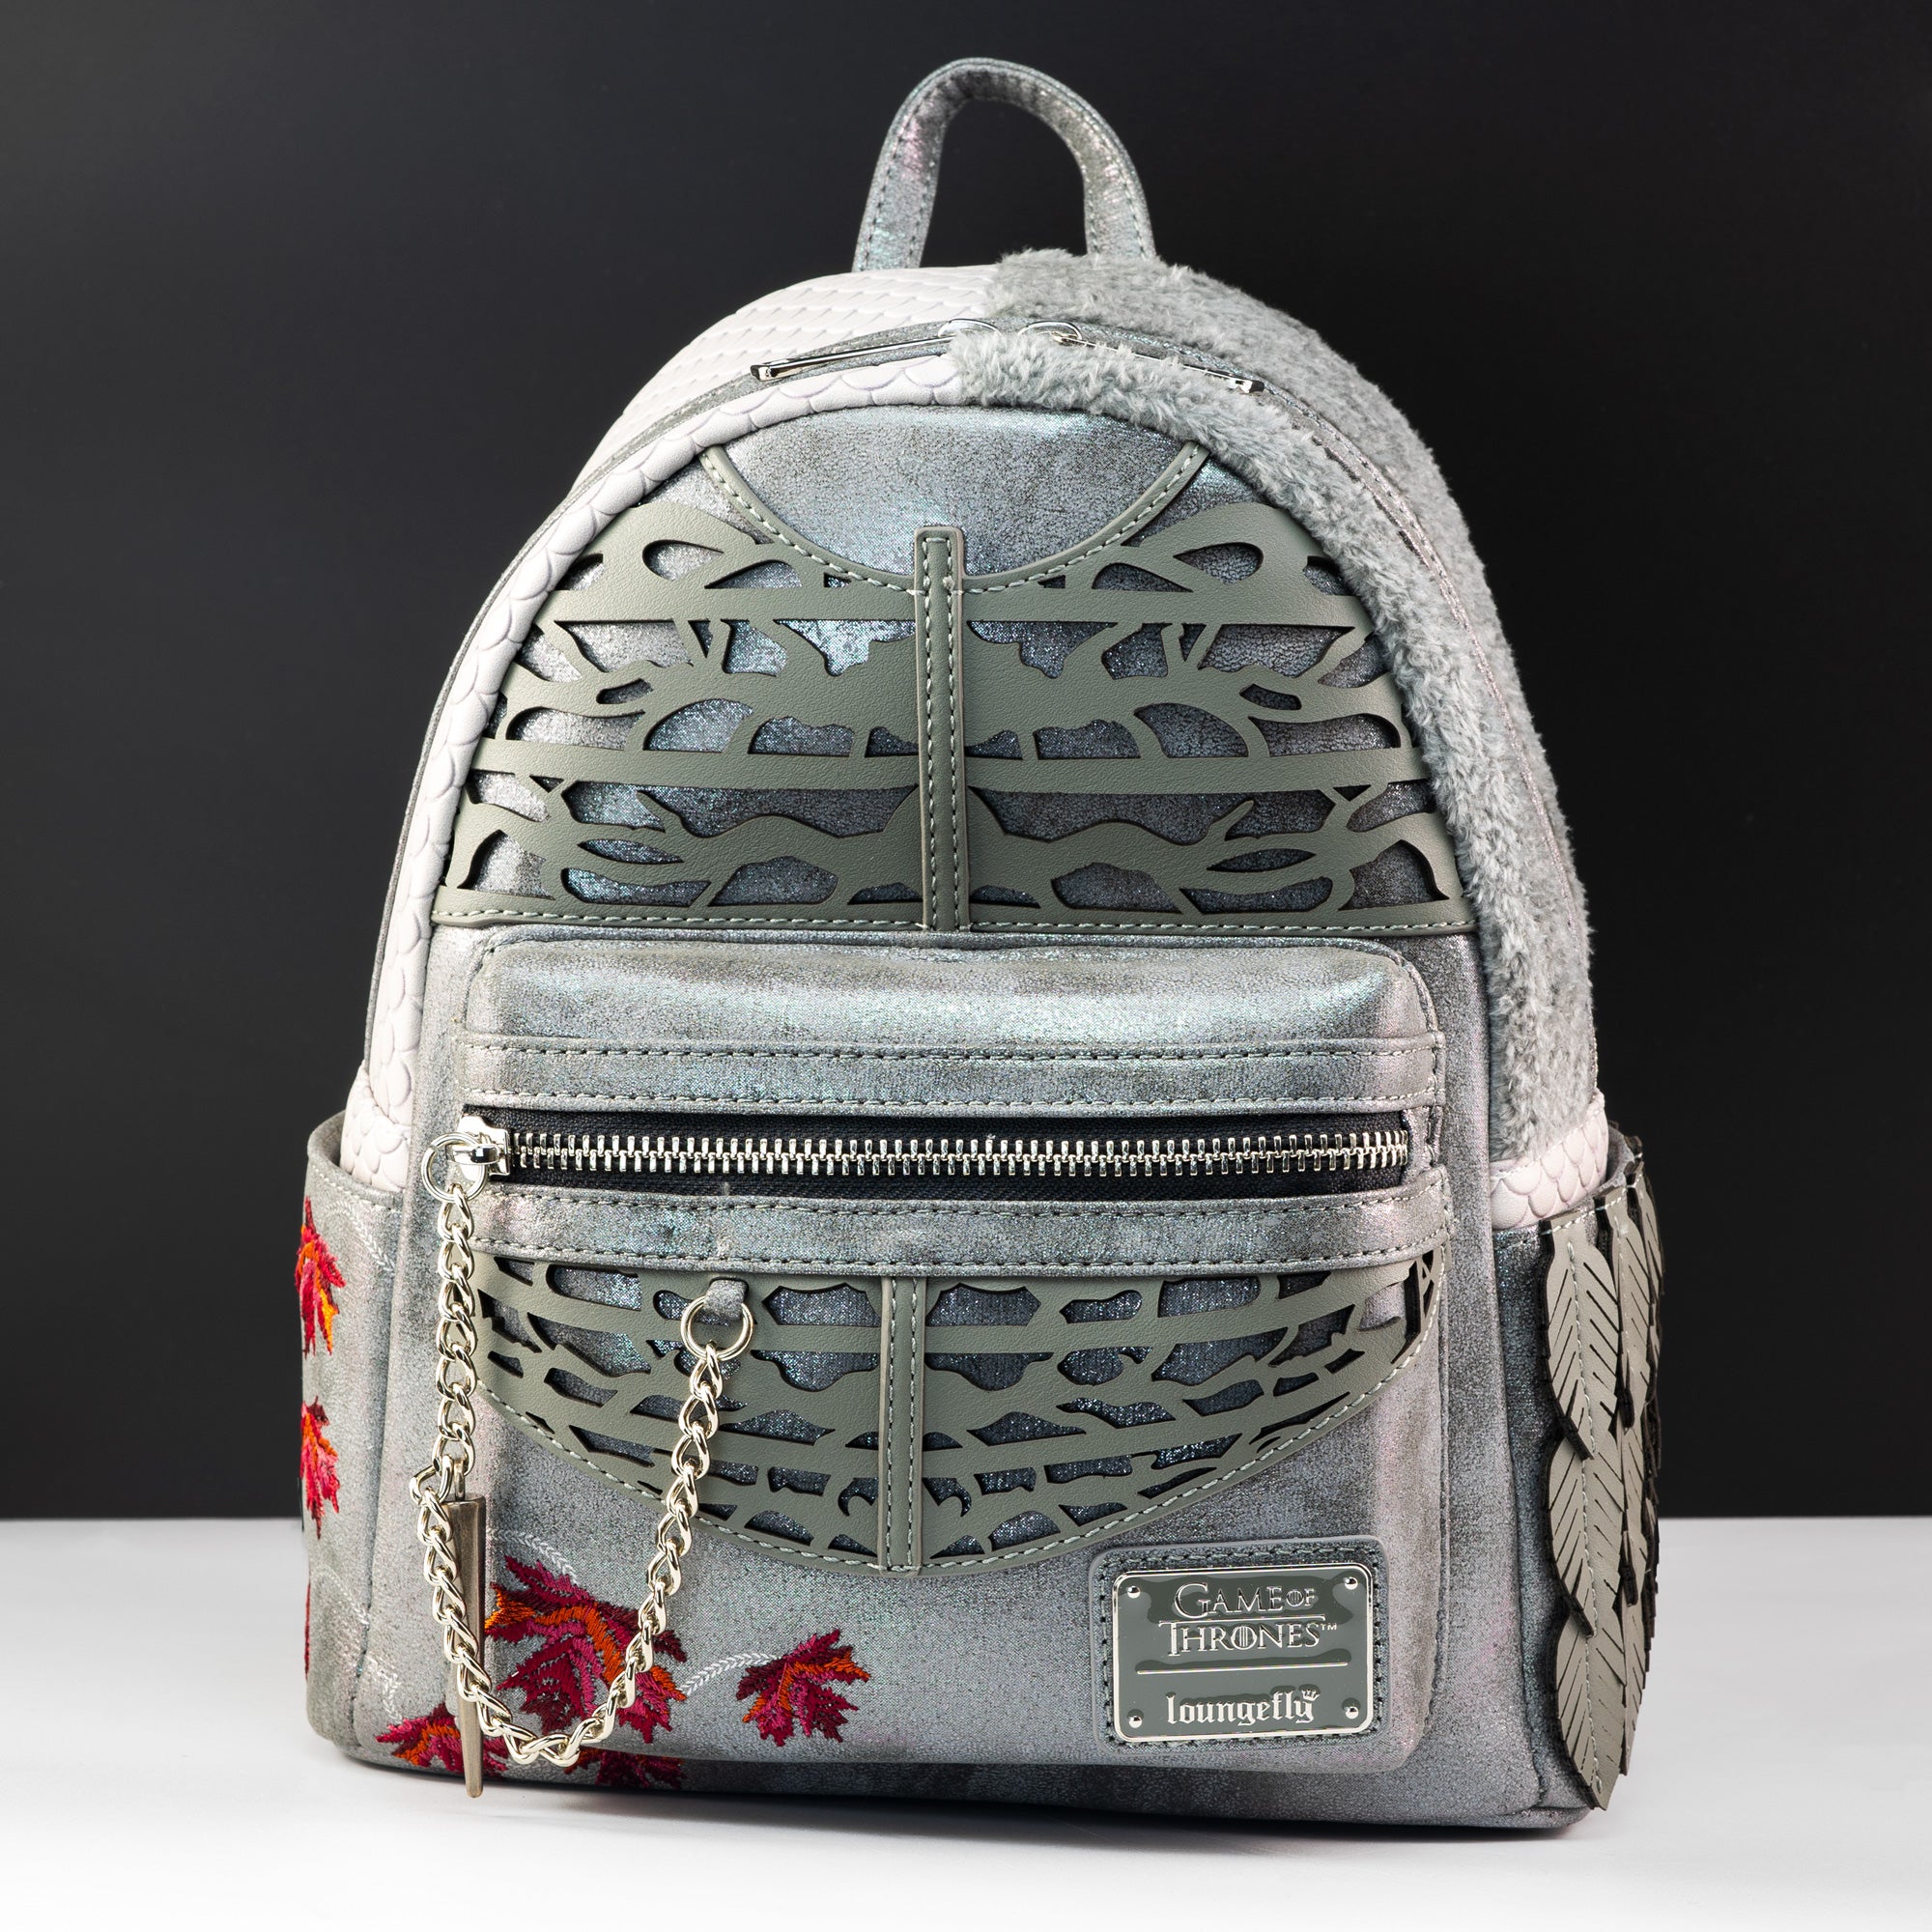 Loungefly x Game of Thrones Sansa Stark Queen in the North Cosplay Mini Backpack